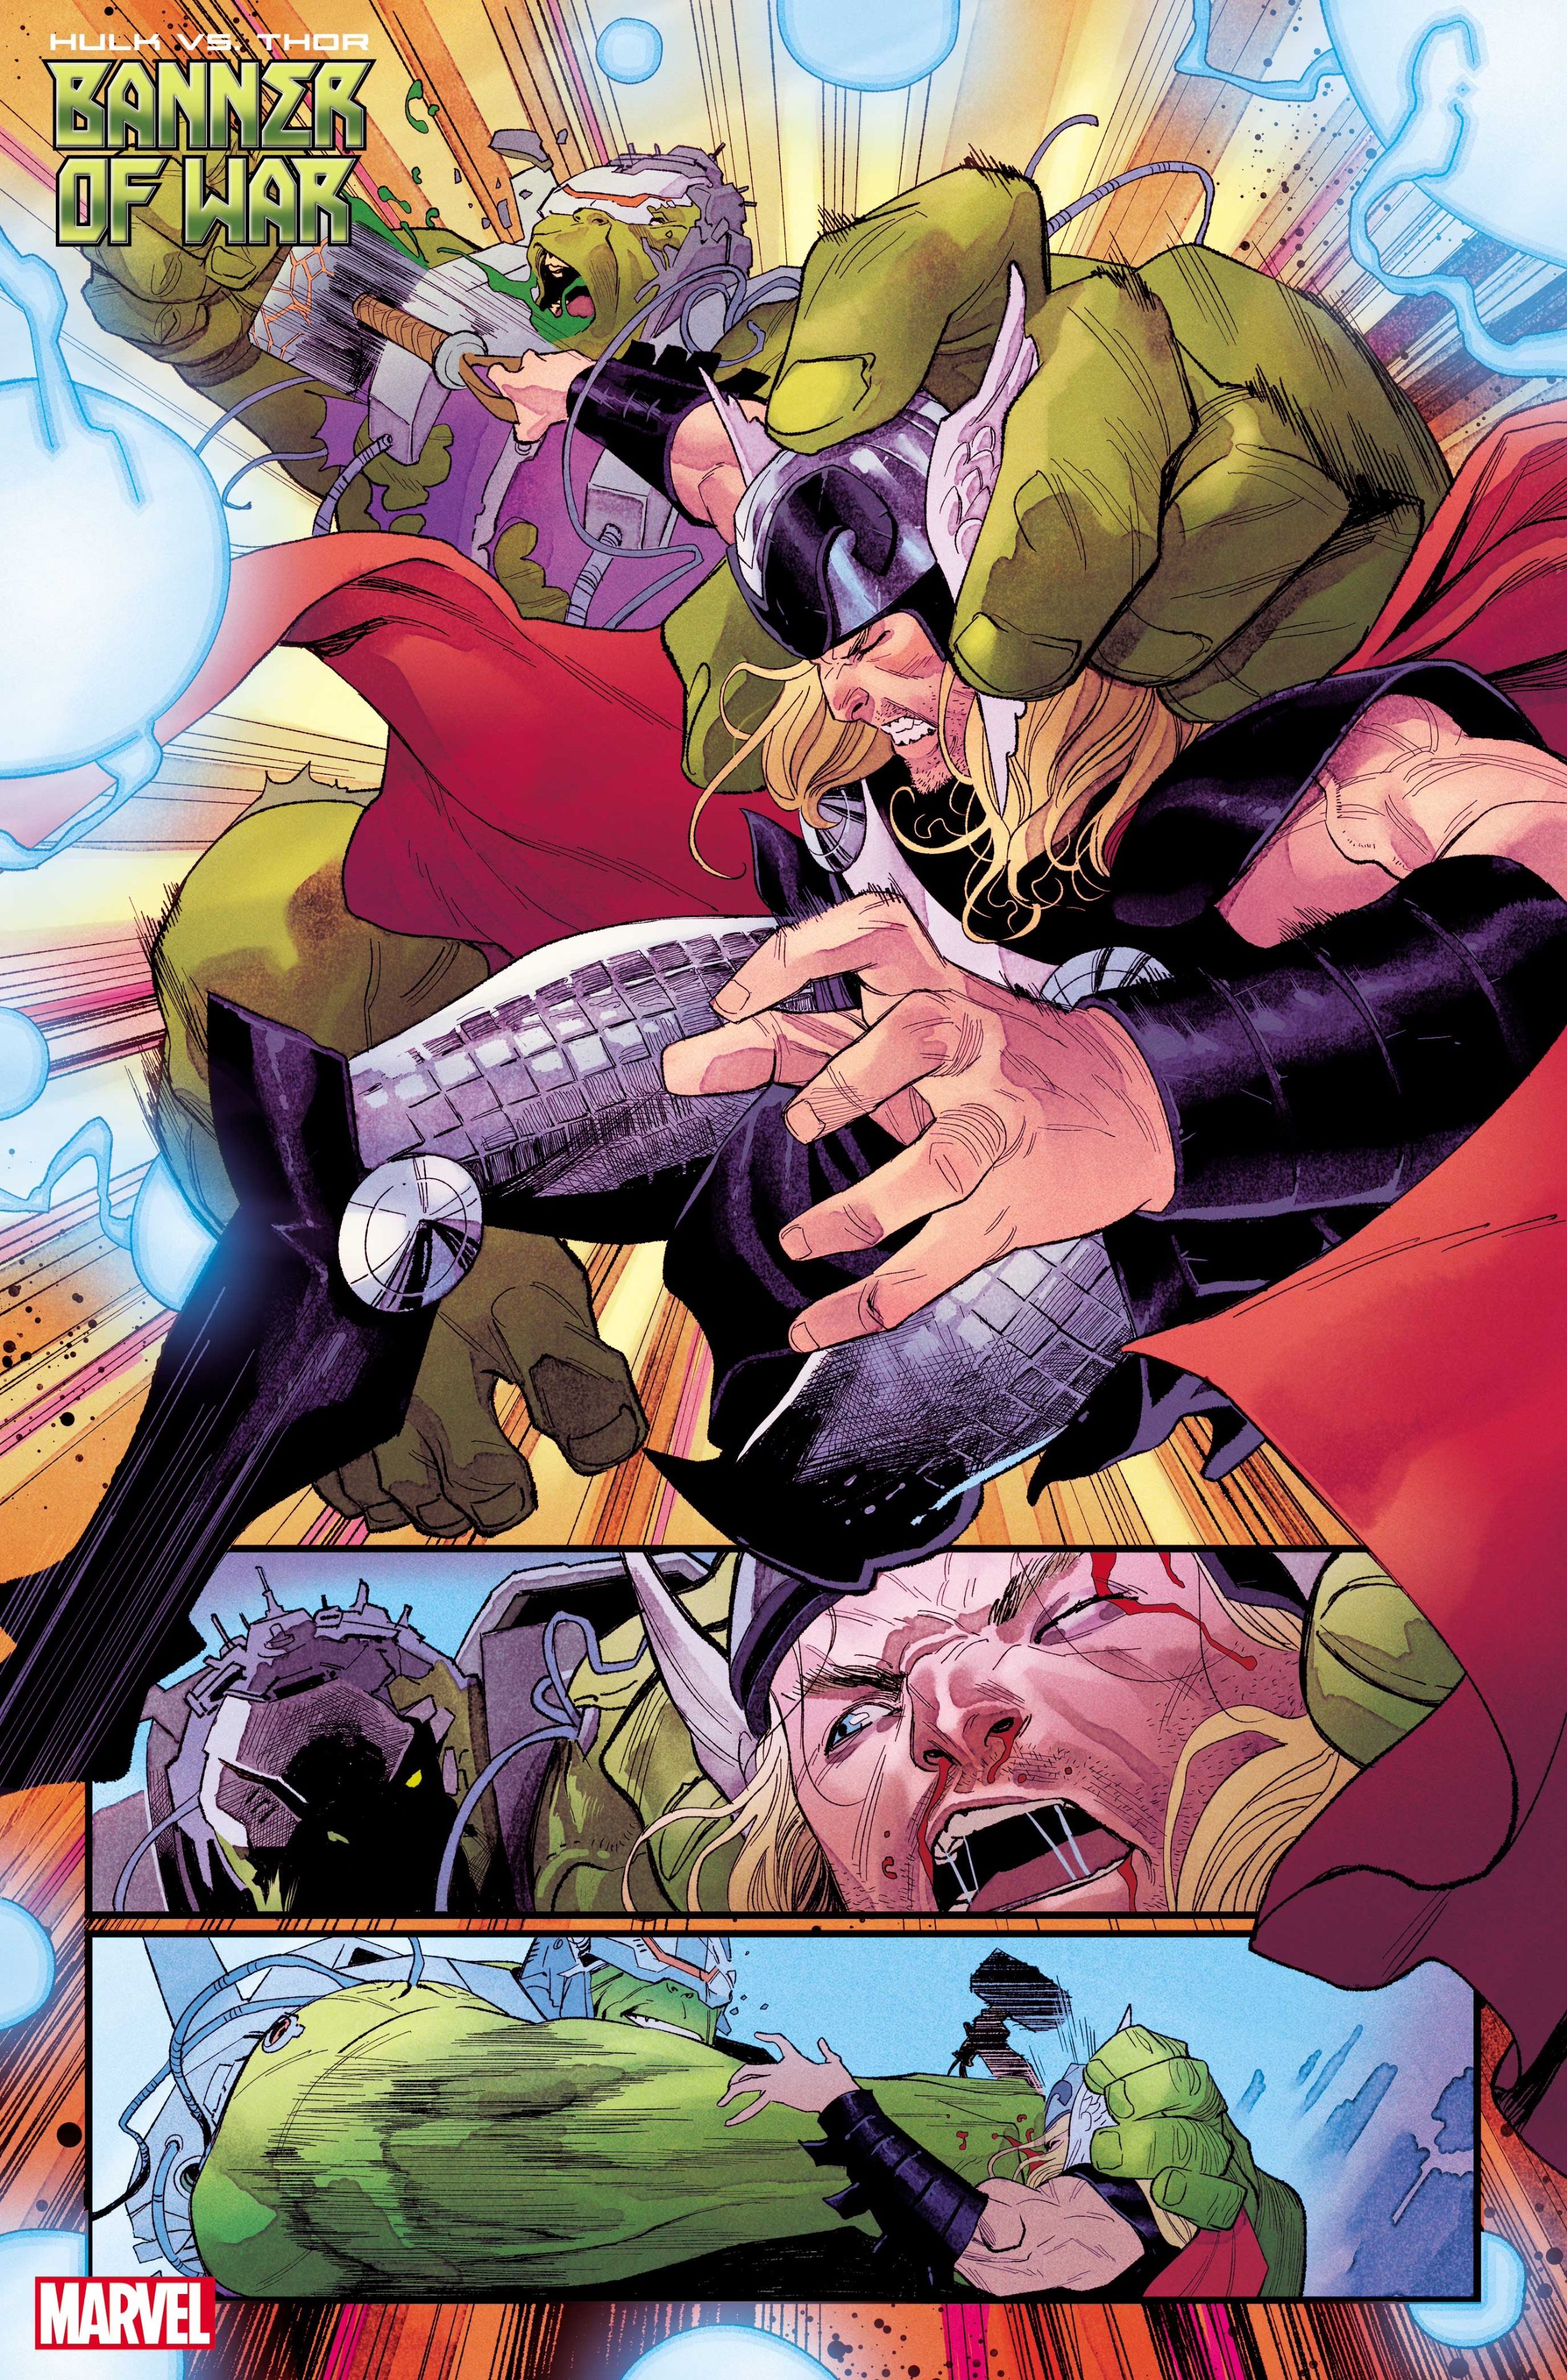 Thor and Hulk fighting in an alien arena